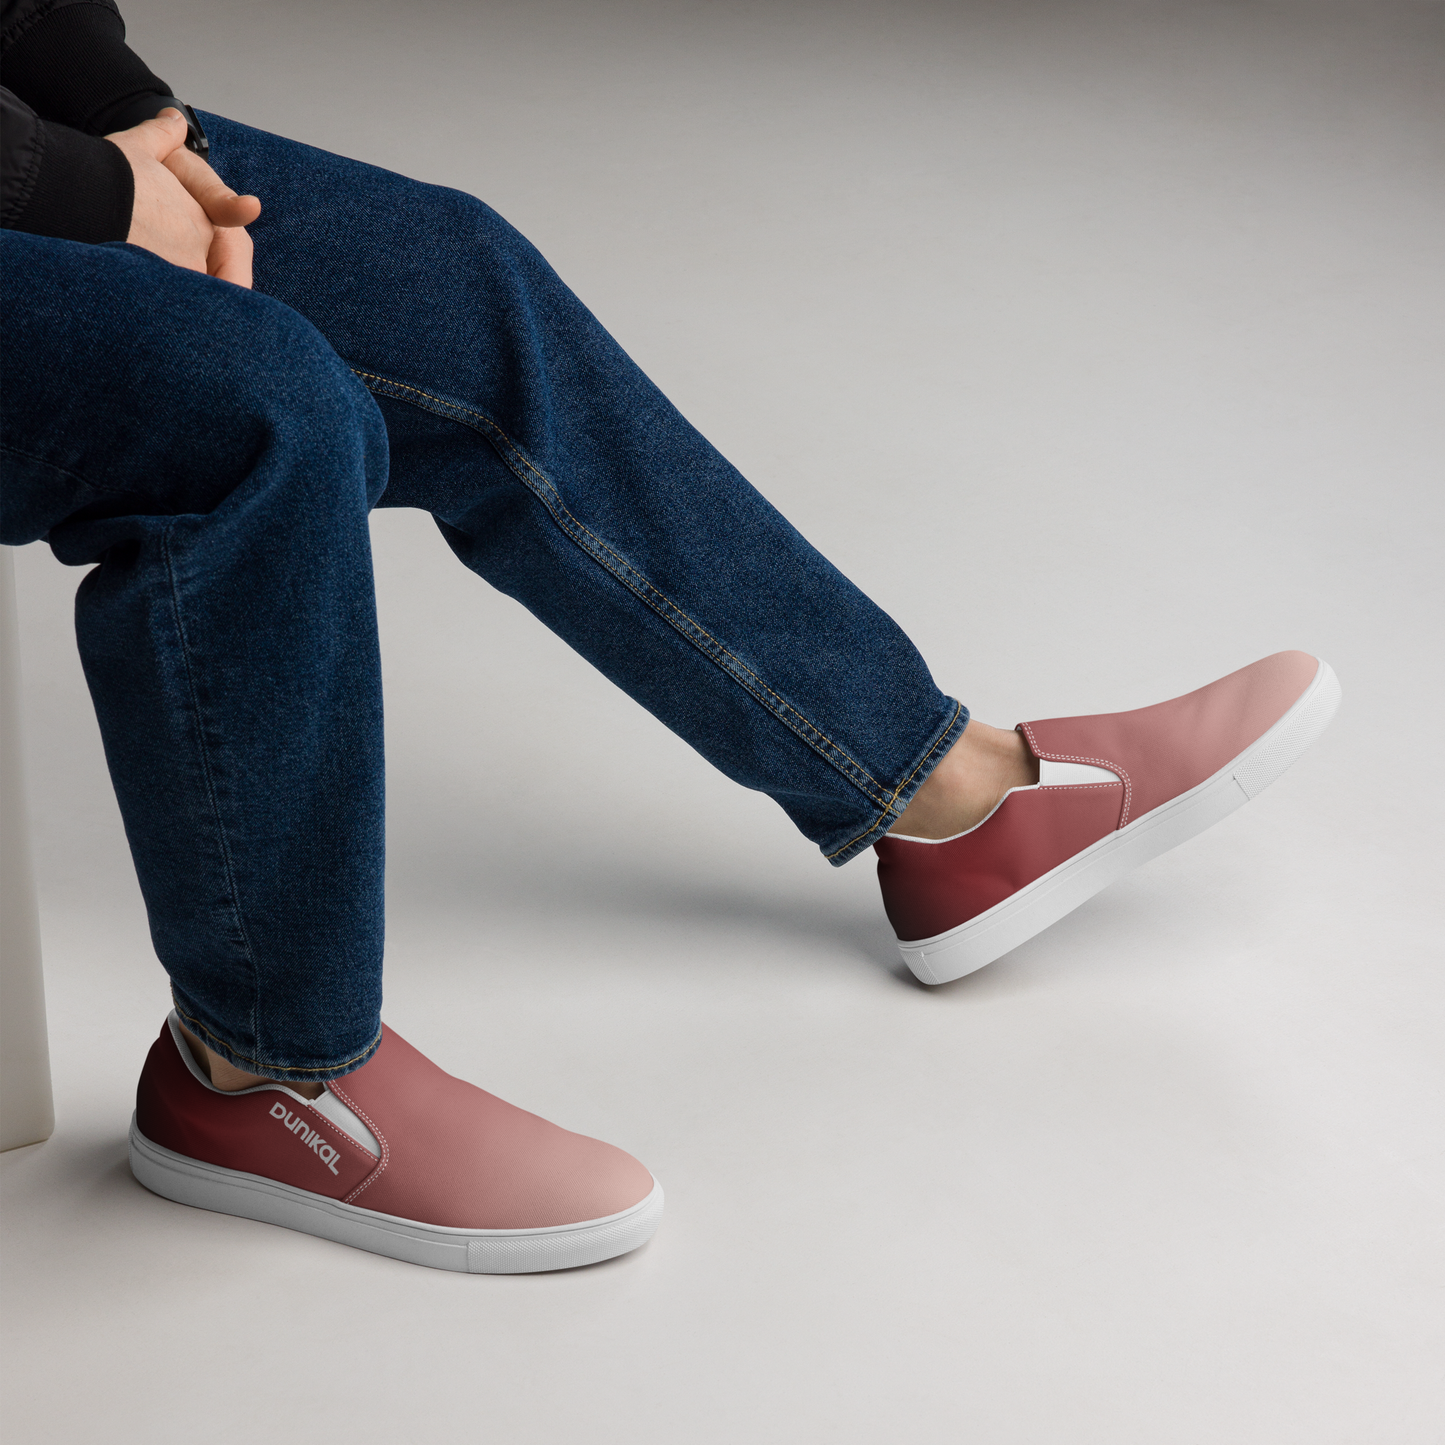 Men's Canvas Slip-ons ❯ Pure Gradient ❯ Ruby Red